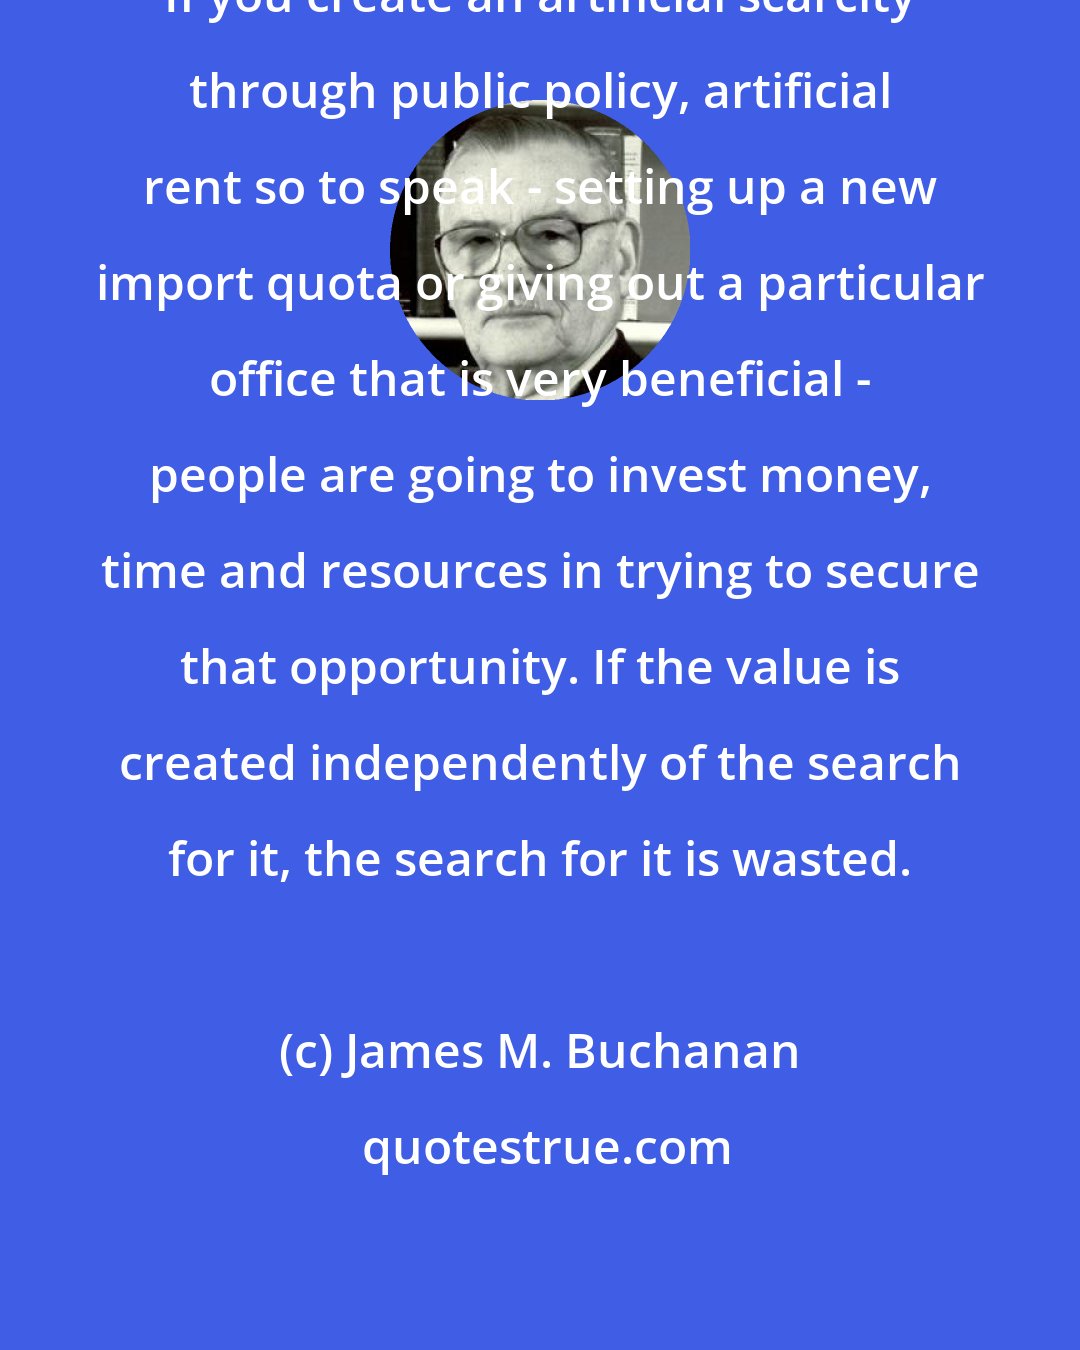 James M. Buchanan: If you create an artificial scarcity through public policy, artificial rent so to speak - setting up a new import quota or giving out a particular office that is very beneficial - people are going to invest money, time and resources in trying to secure that opportunity. If the value is created independently of the search for it, the search for it is wasted.